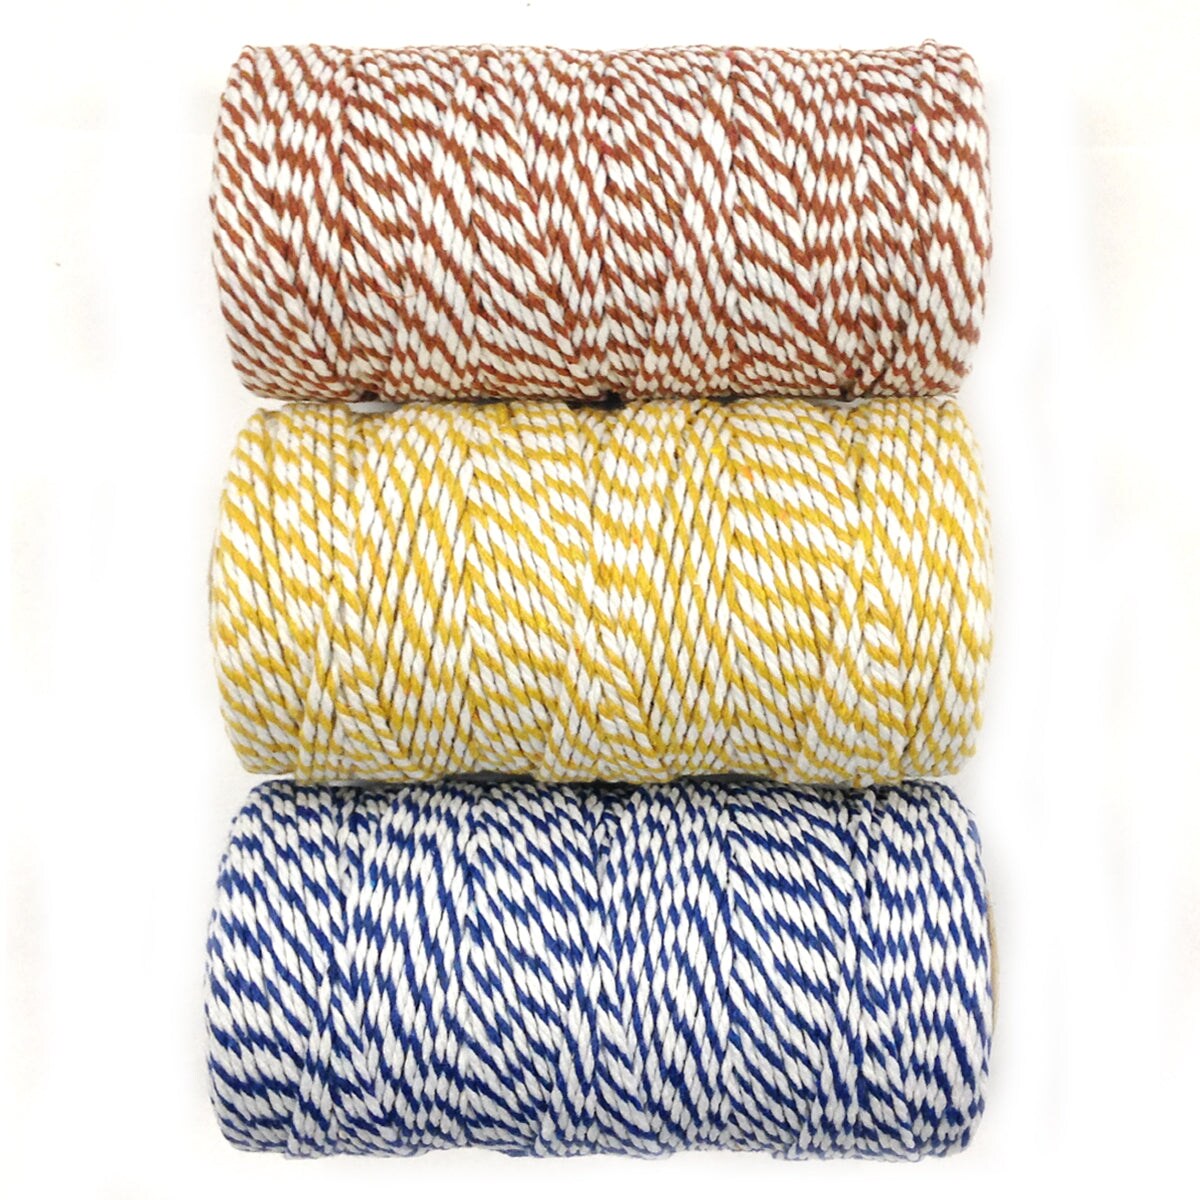 Wrapables Cotton Baker&#x27;s Twine 12ply 330 Yards (Set of 3 Spools x 110 Yards) for Gift Wrapping, Party Decor, and Arts and Crafts (Brown, Dark Yellow, Navy)